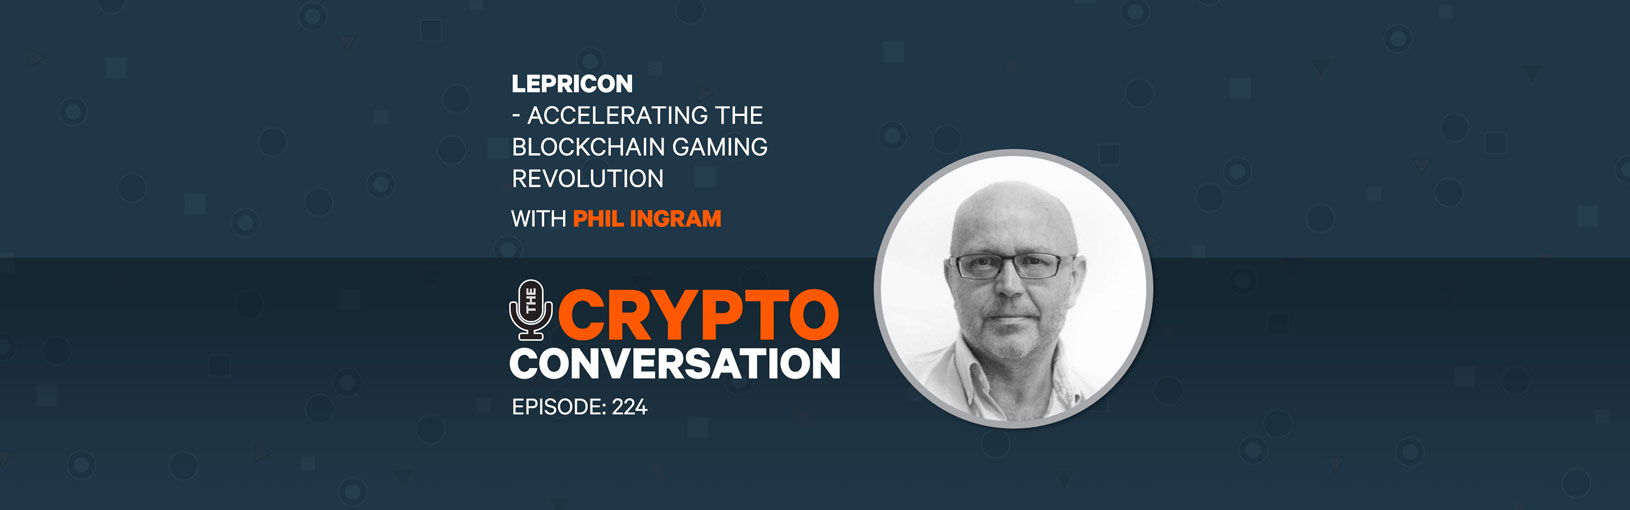 Lepricon – Accelerating the blockchain gaming revolution